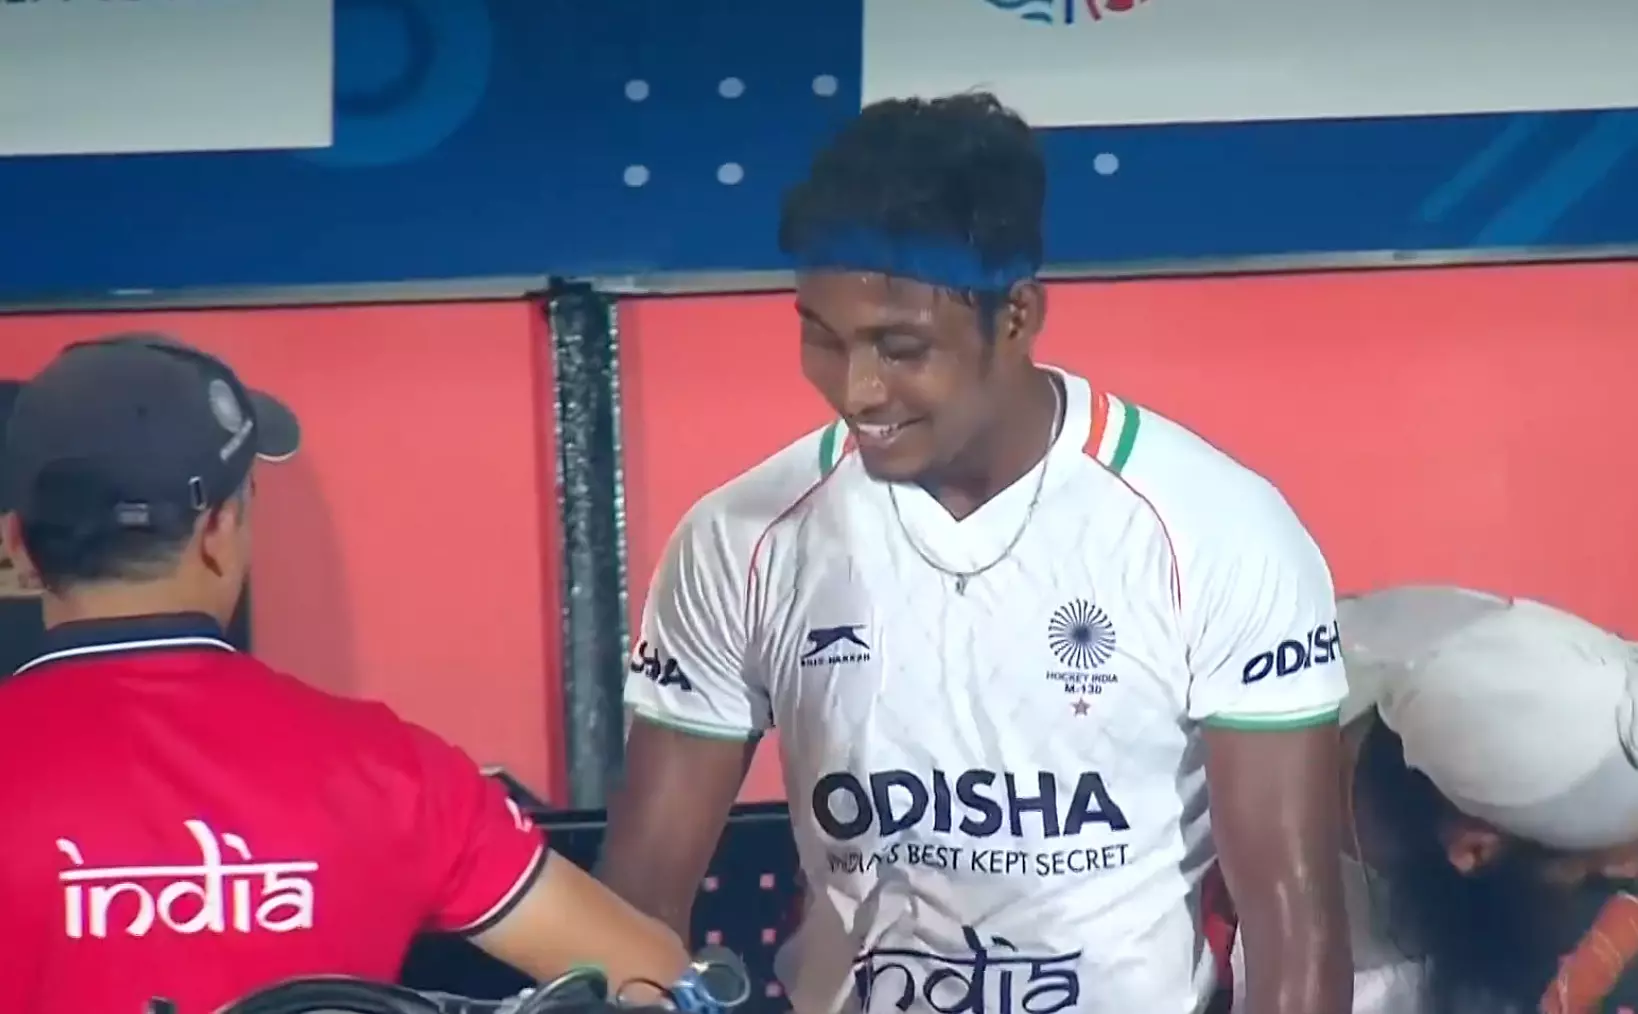 Karthi Selvam is congratulated in the Indian dugout after scoring his second goal of the match (Screenshot)